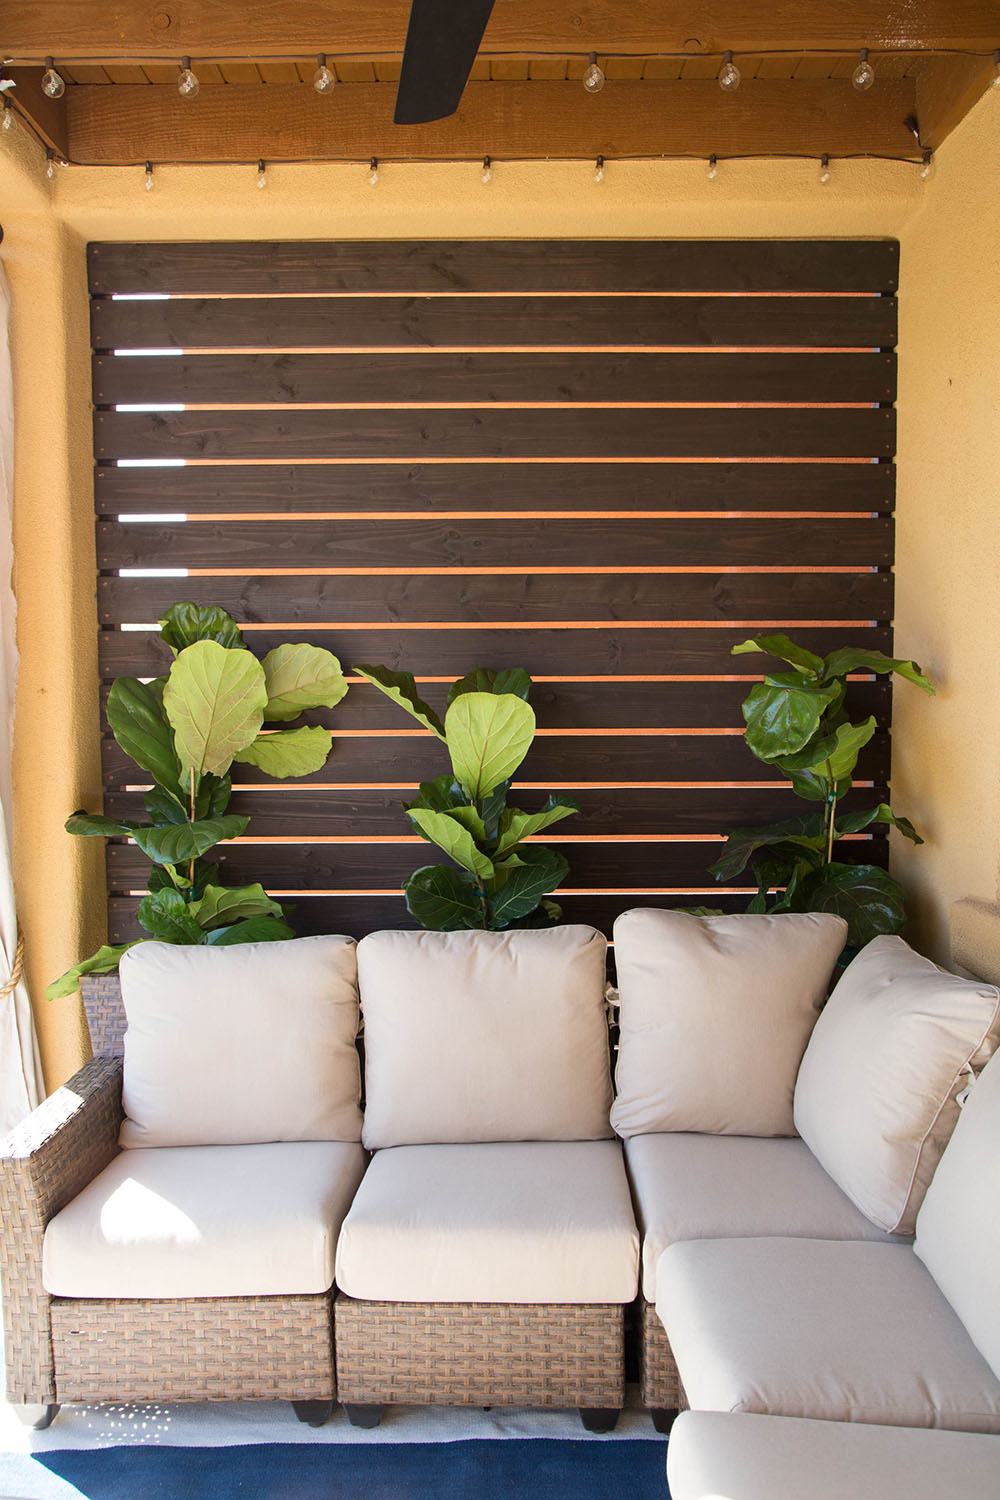 Planks of wood creating an outdoor wall with a beige patio couch and three plants.